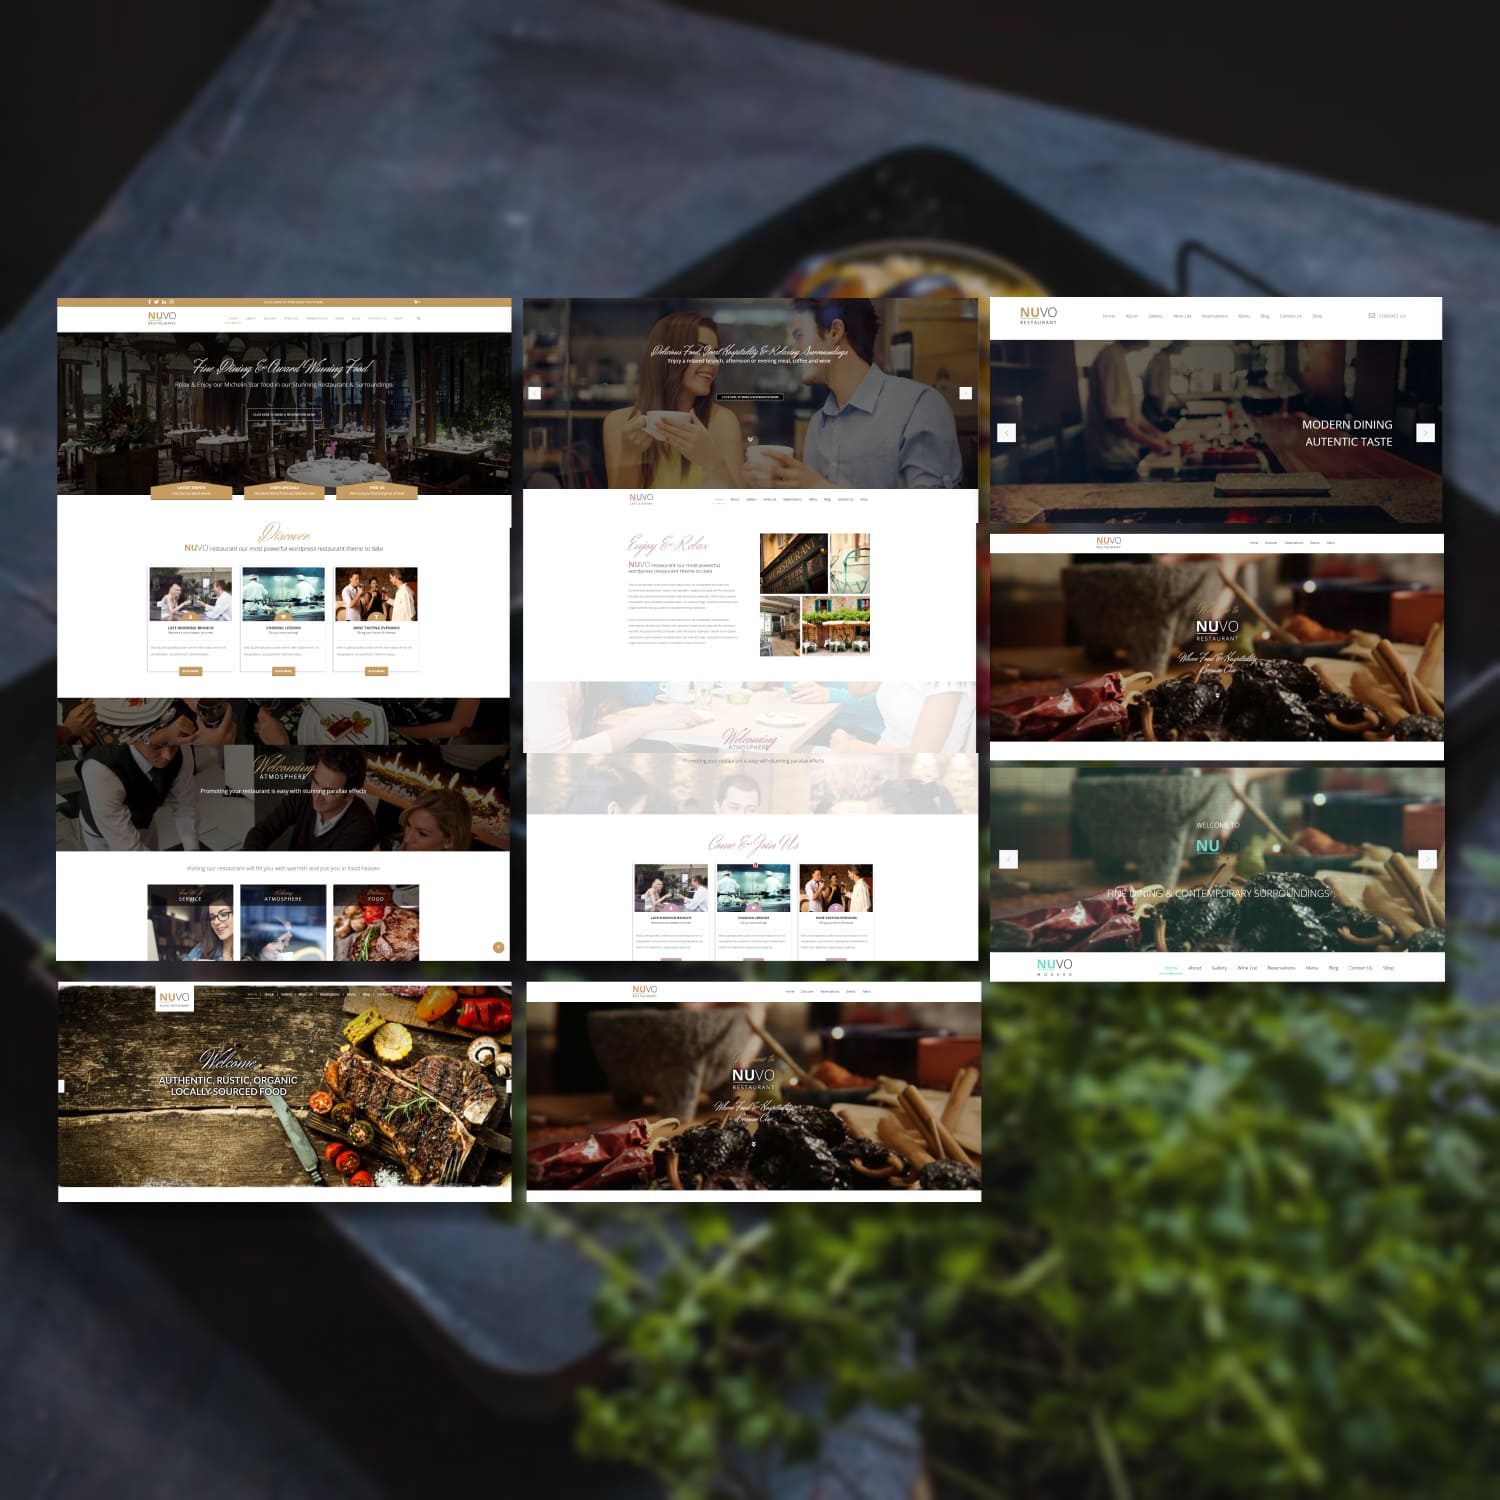 A set of gorgeous restaurant themed WordPress template pages.